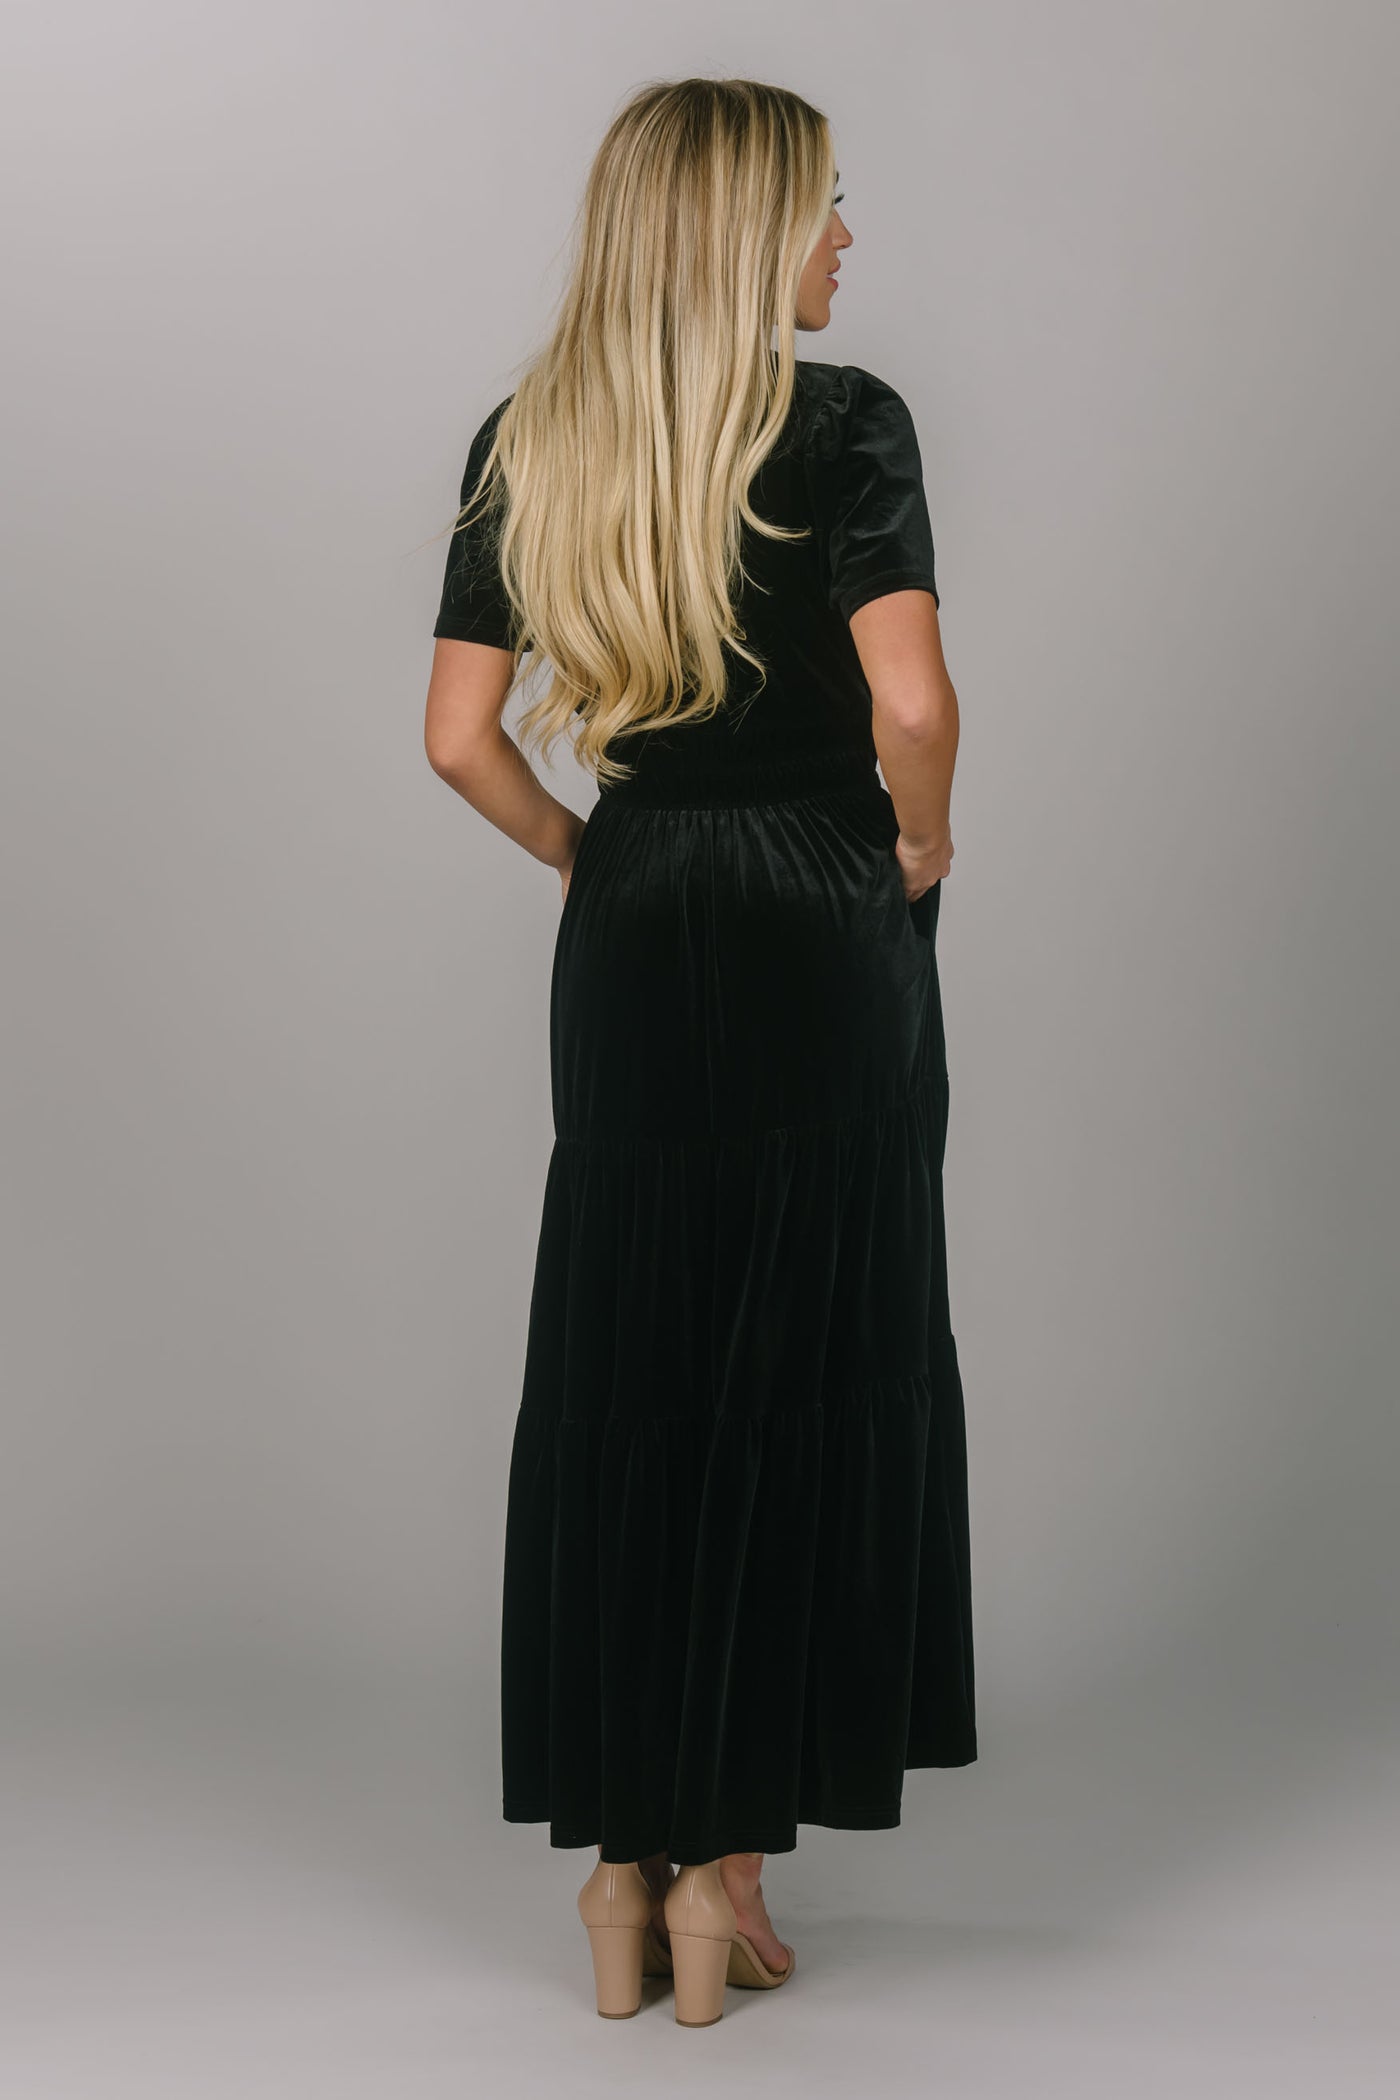 Modest everyday and bridesmaid black colored dress. This dress is velvet, has a v-neckline, and a tiered skirt. This modest dress for women is floor length and super comfortable.